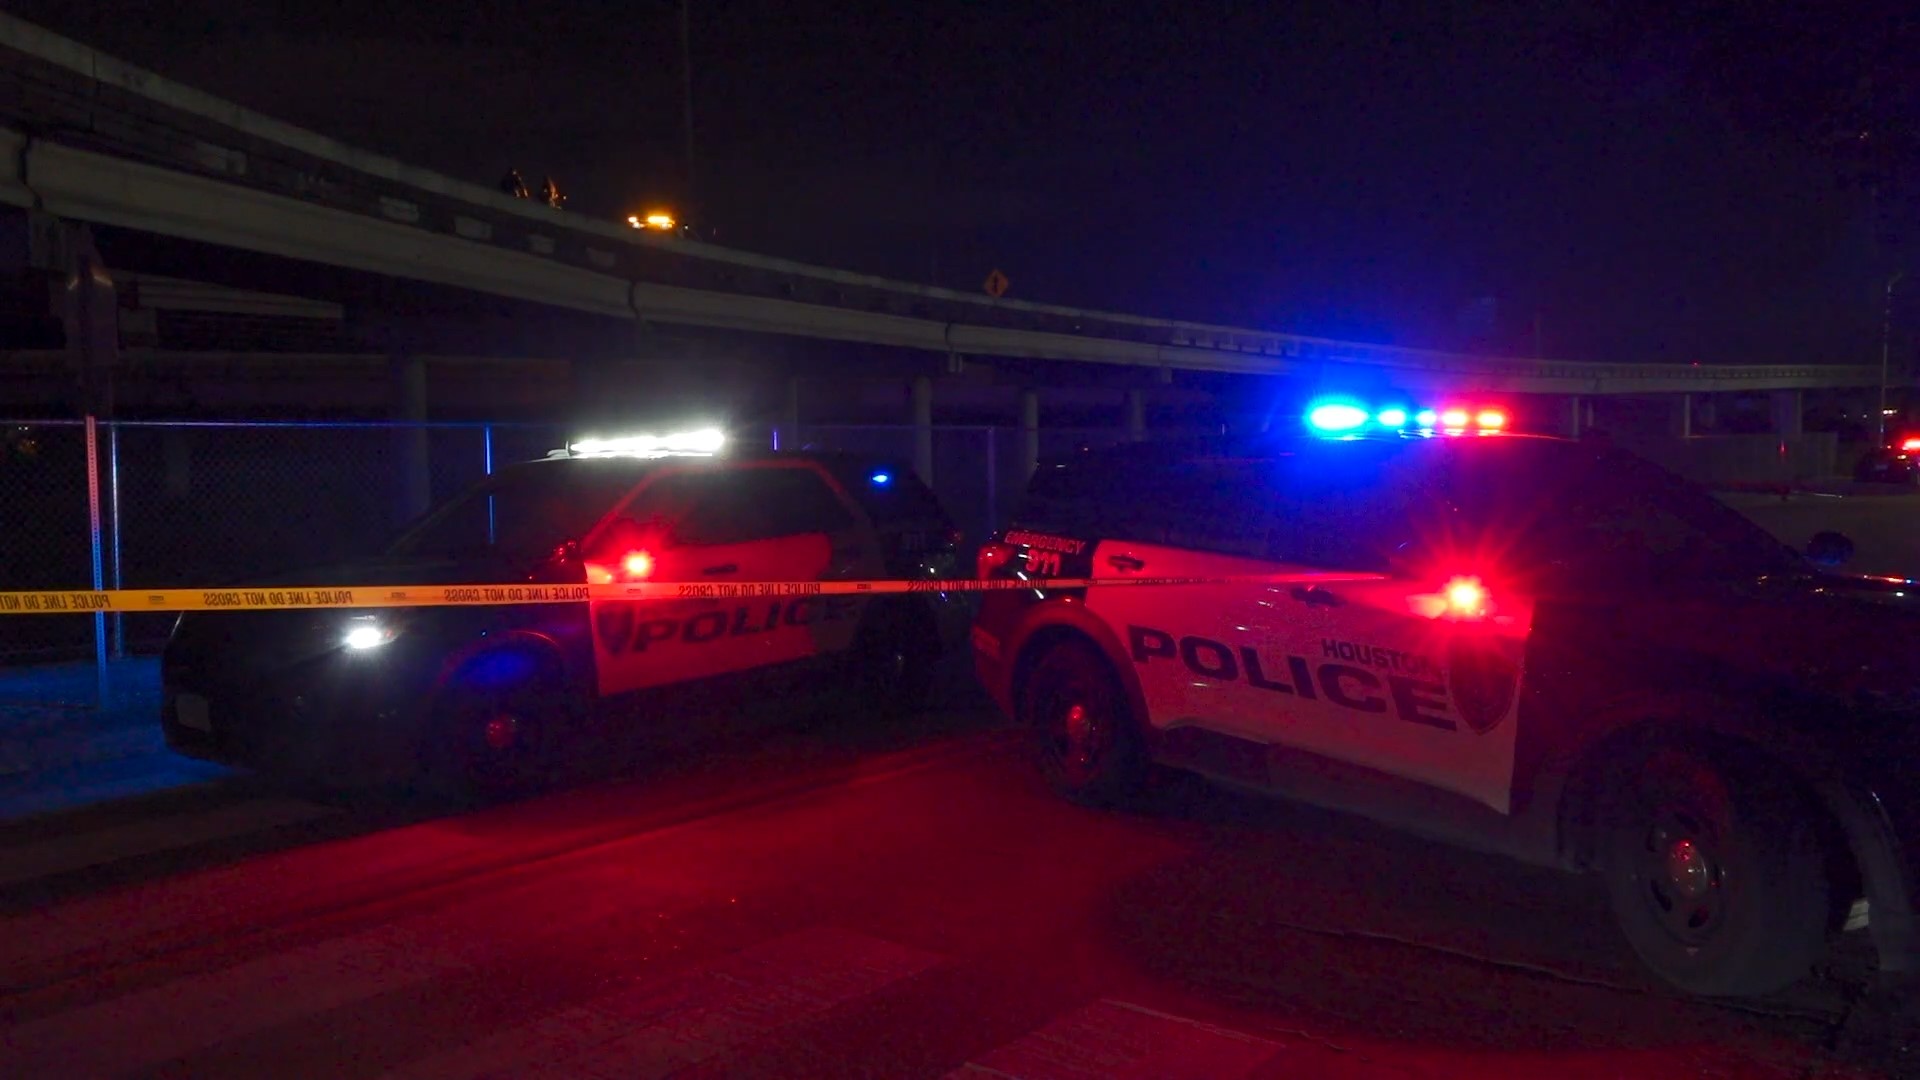 Police said the woman's body was found on the ground under the overpass after she was ejected.